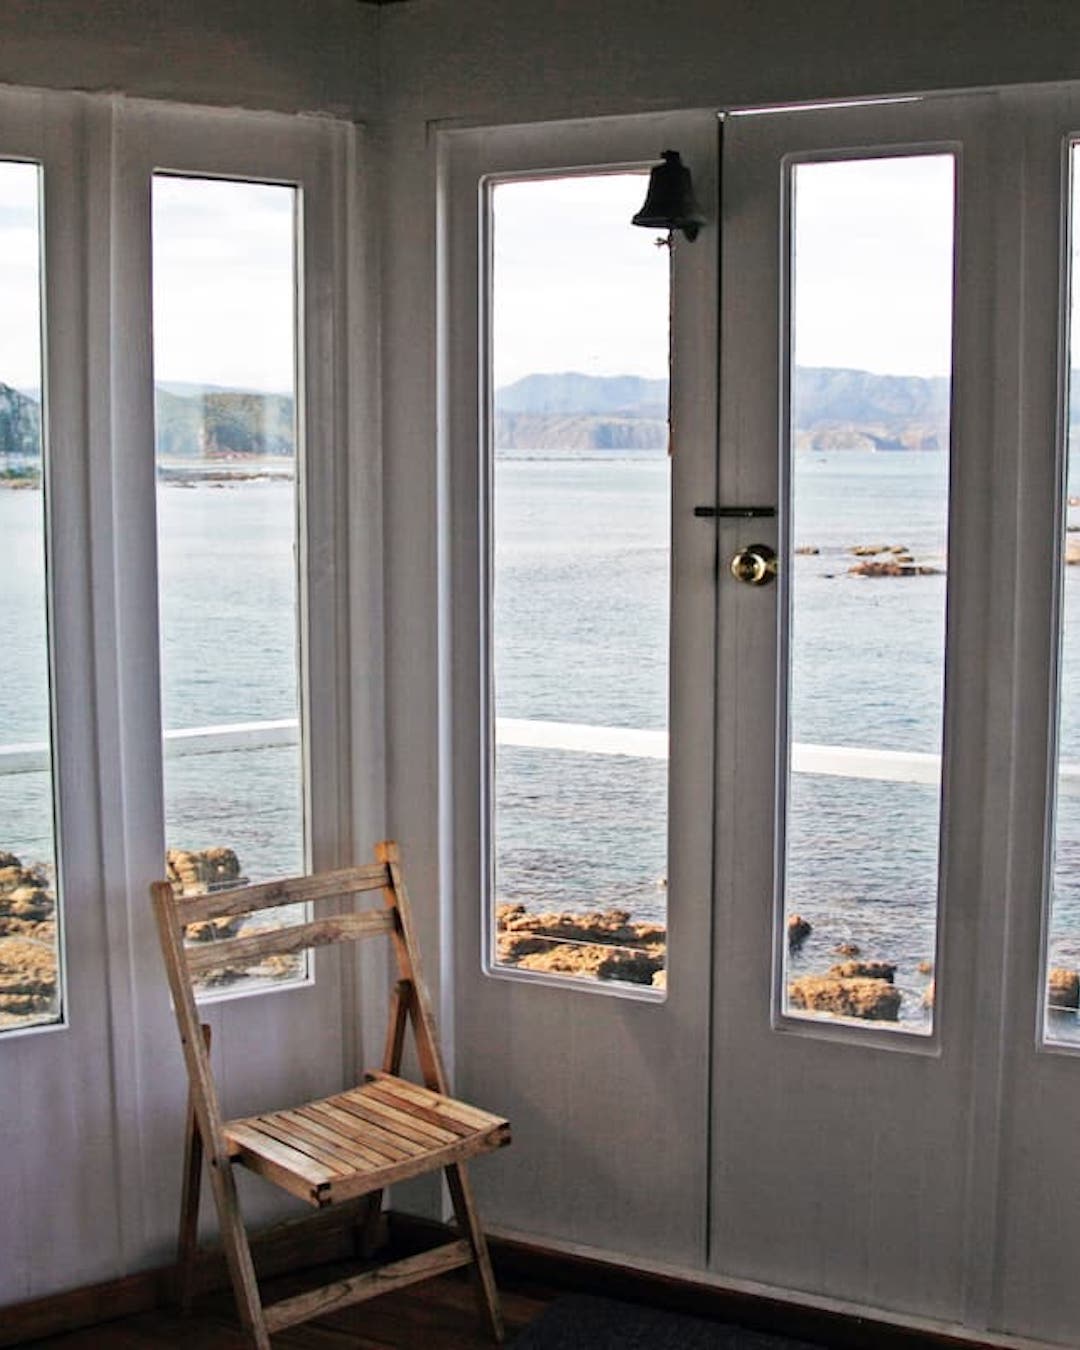 One of New Zealand's best Airbnbs: a converted lighthouse overlooking a bay